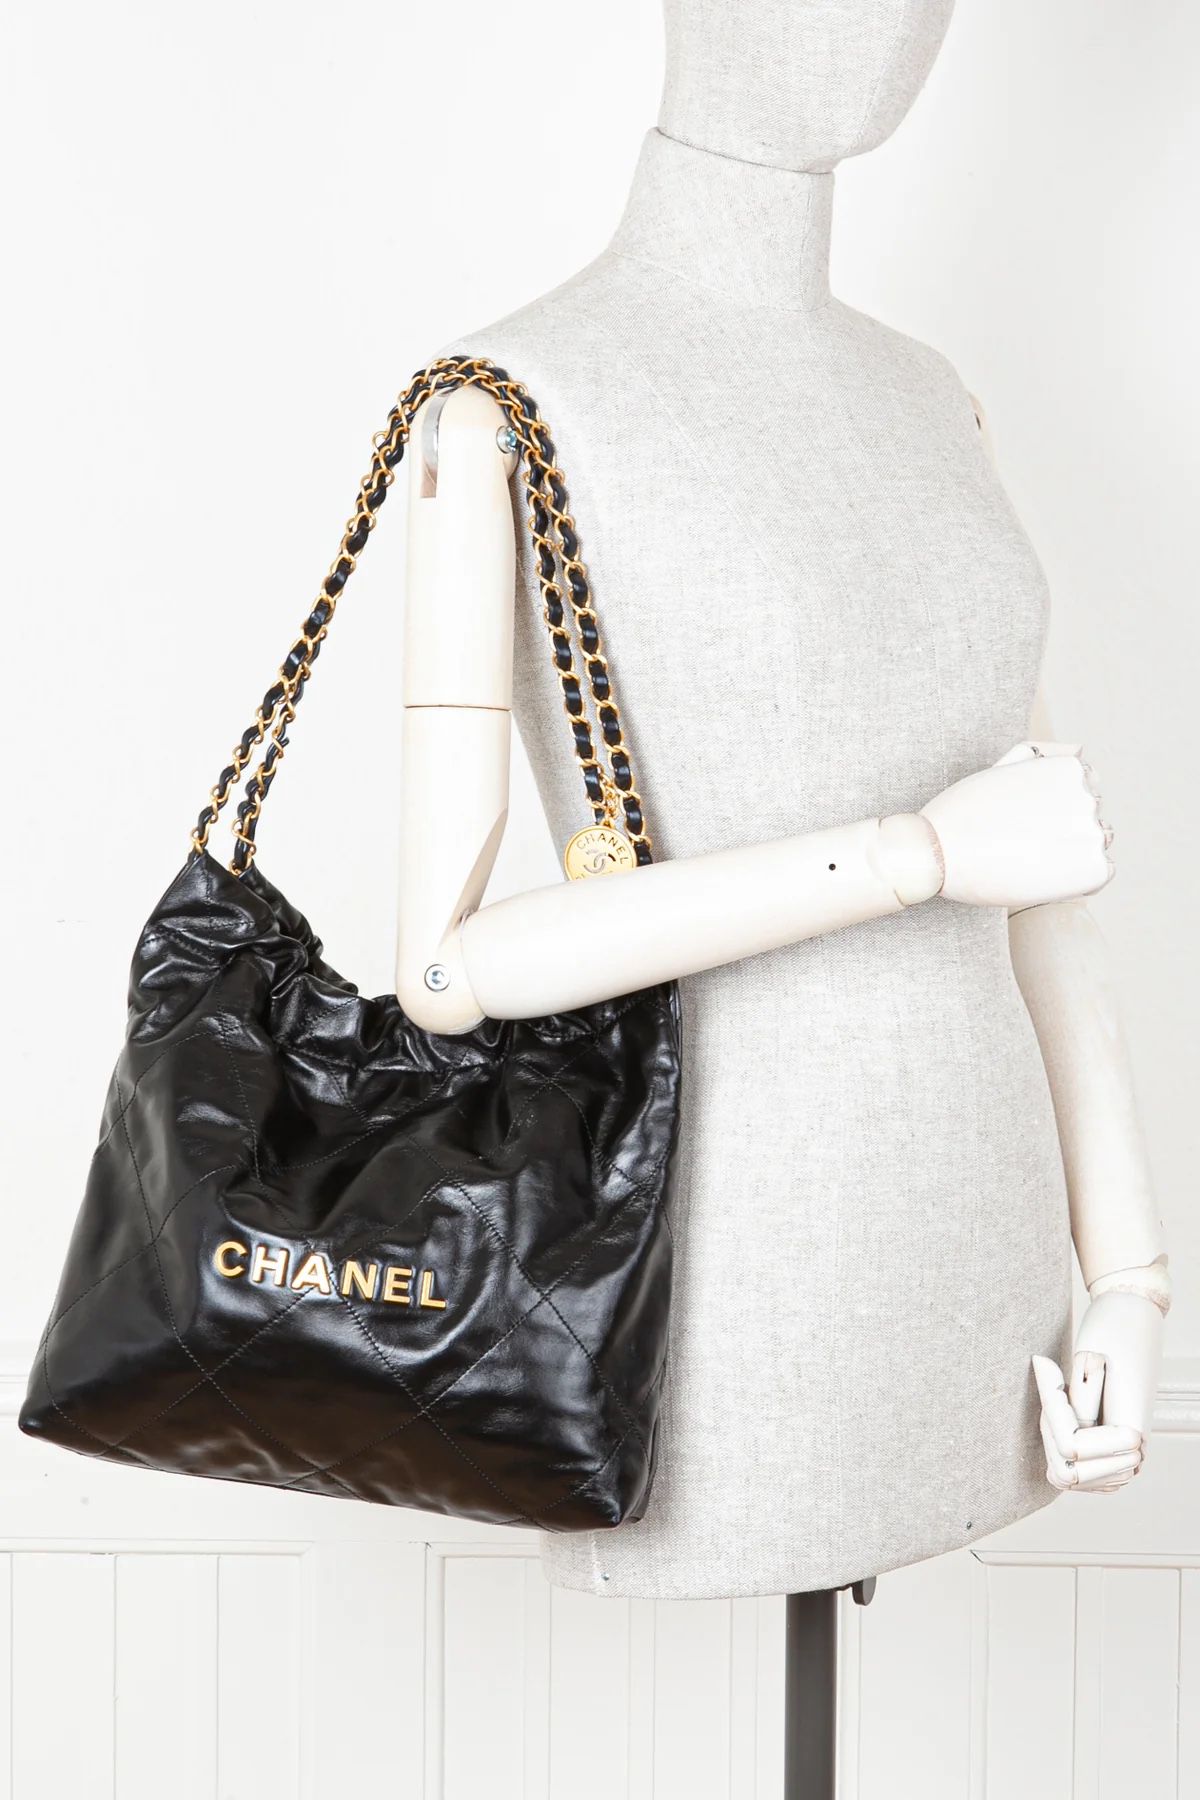 Ch@nel Leather Bag 